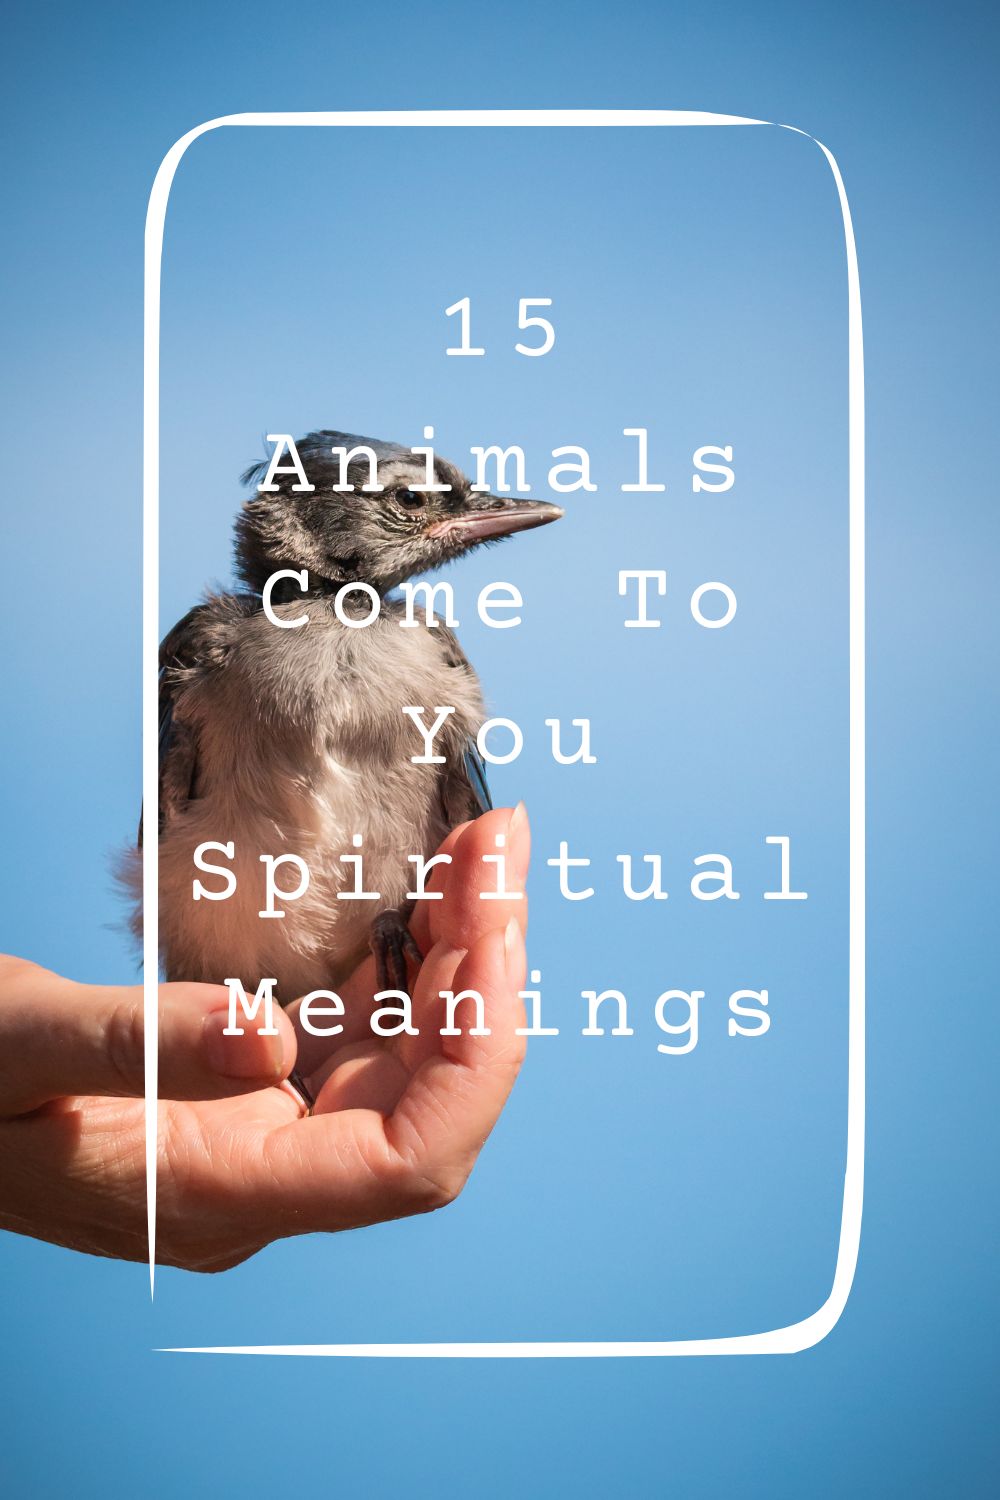 15 Animals Come To You Spiritual Meanings 4